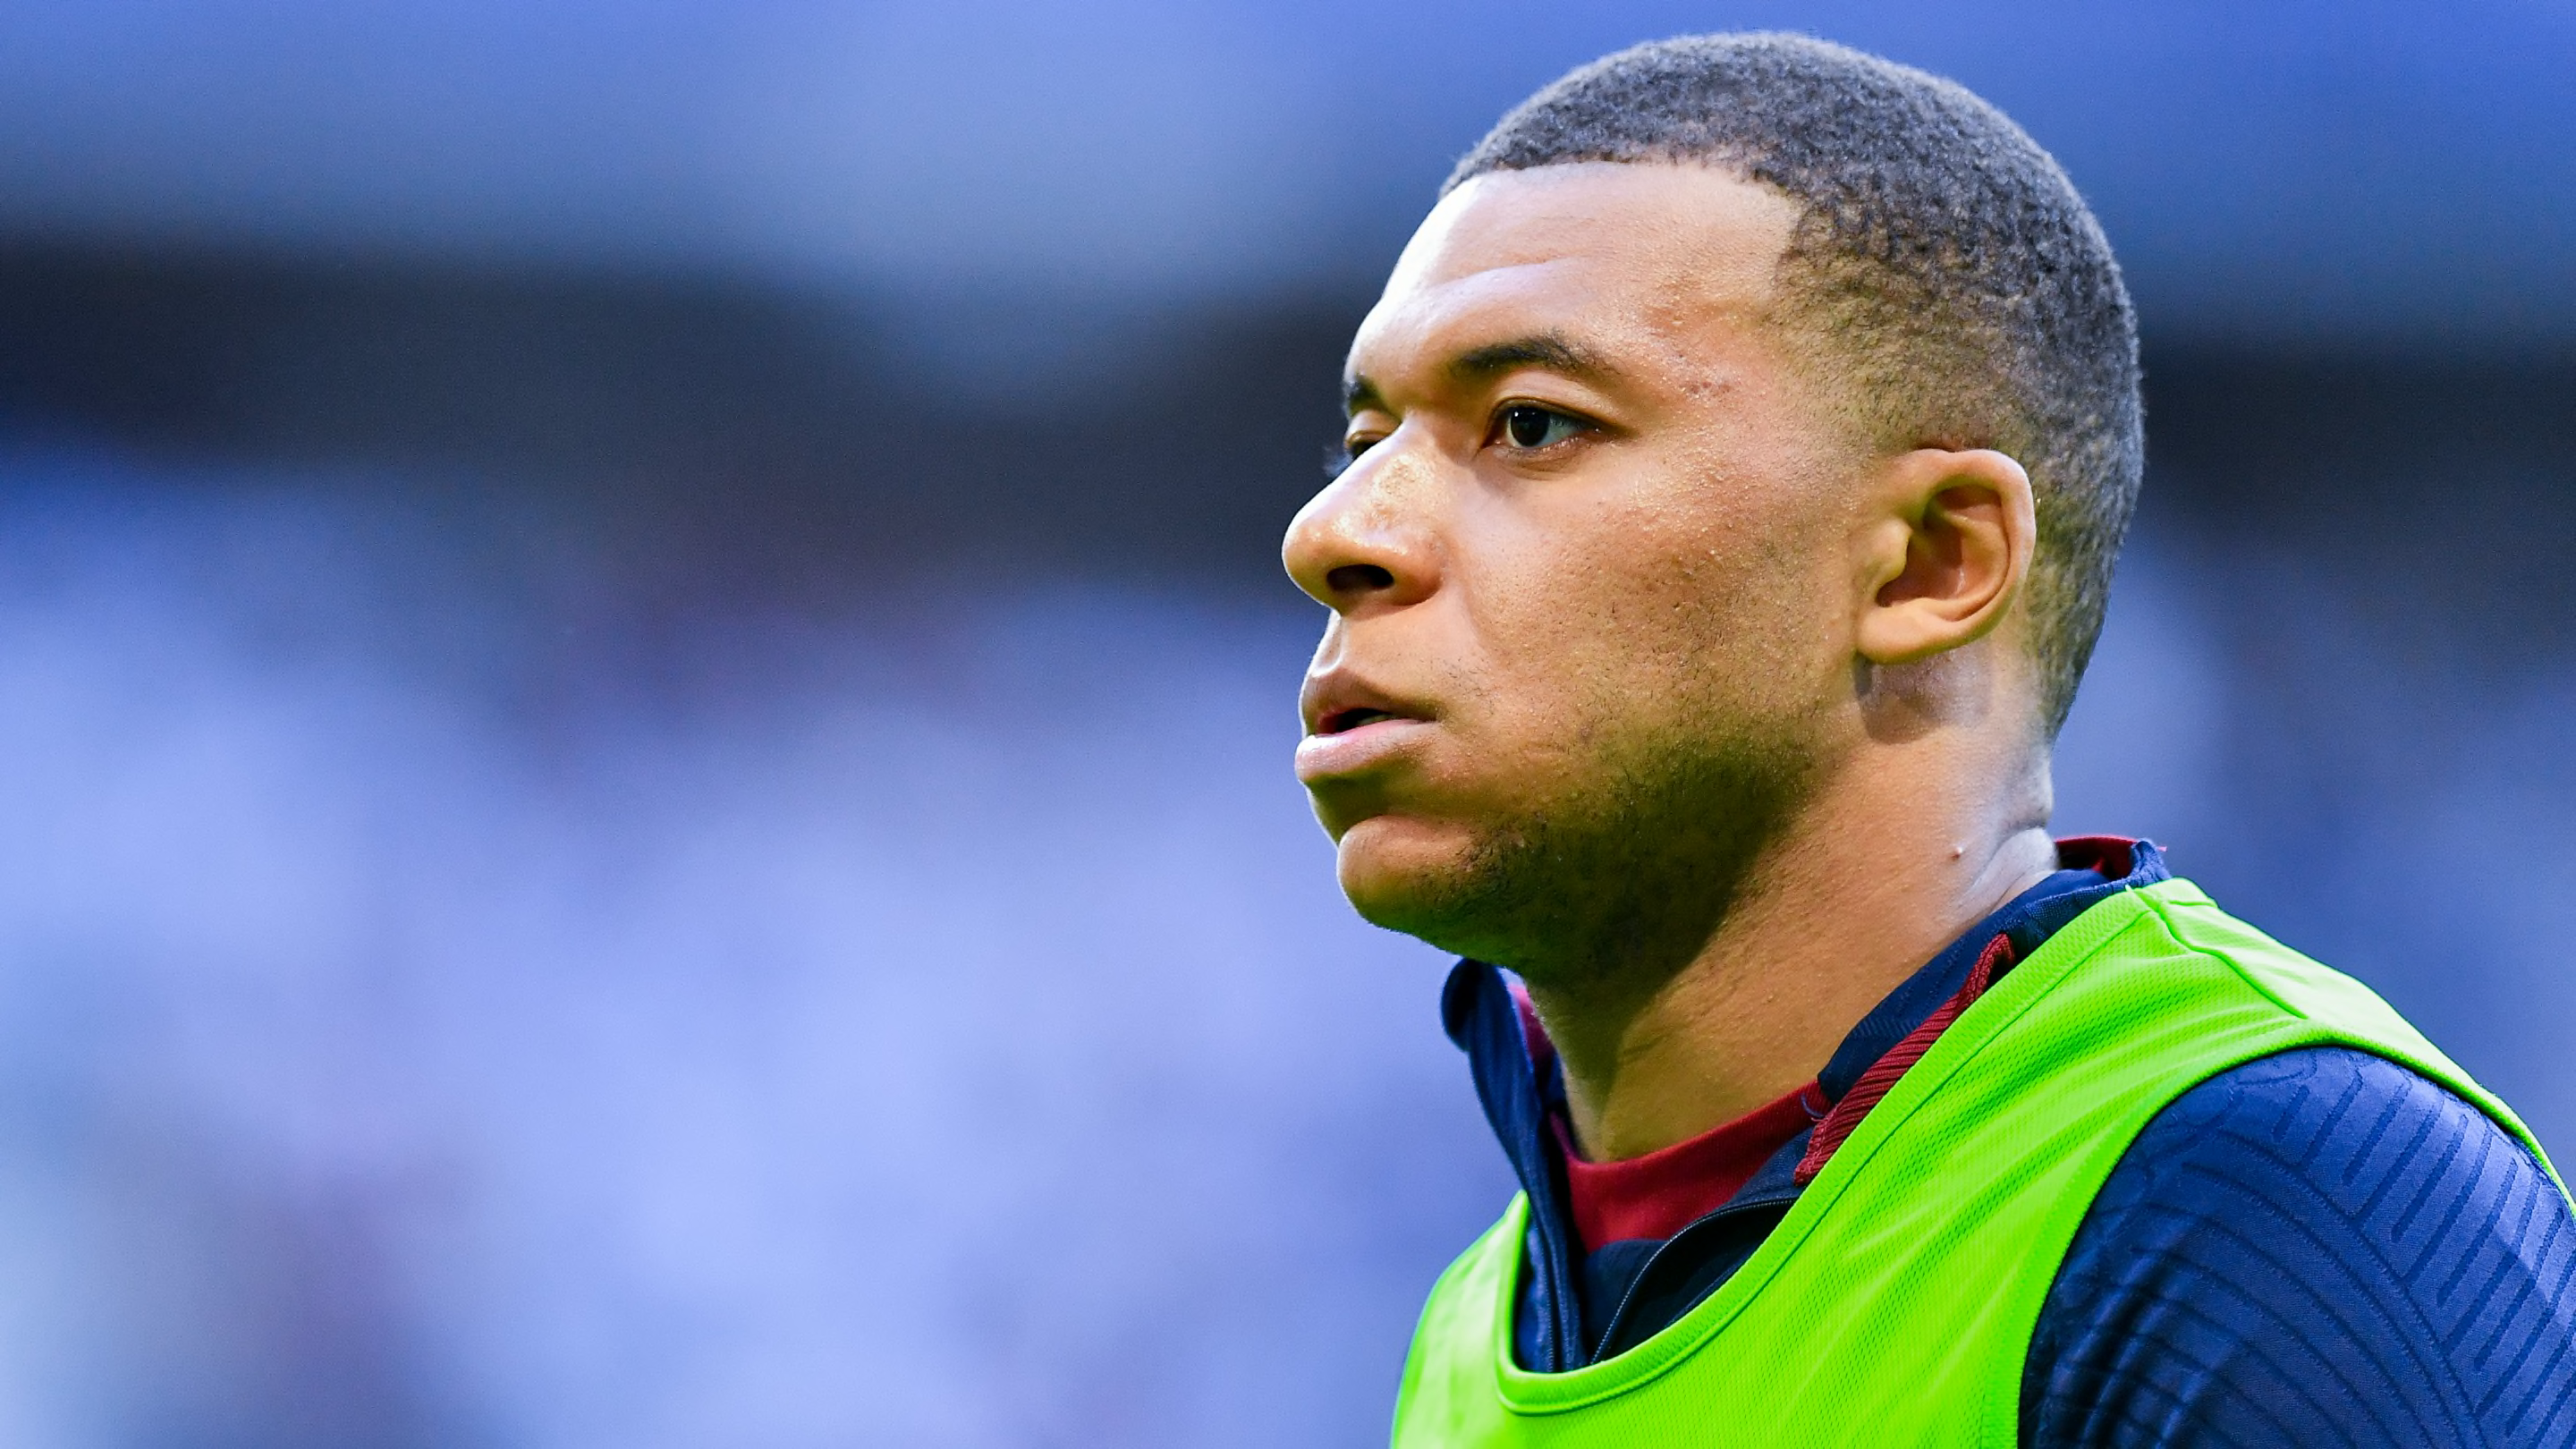 'I was spoken to violently' - Kylian Mbappe reveals shocking details of PSG contract feud